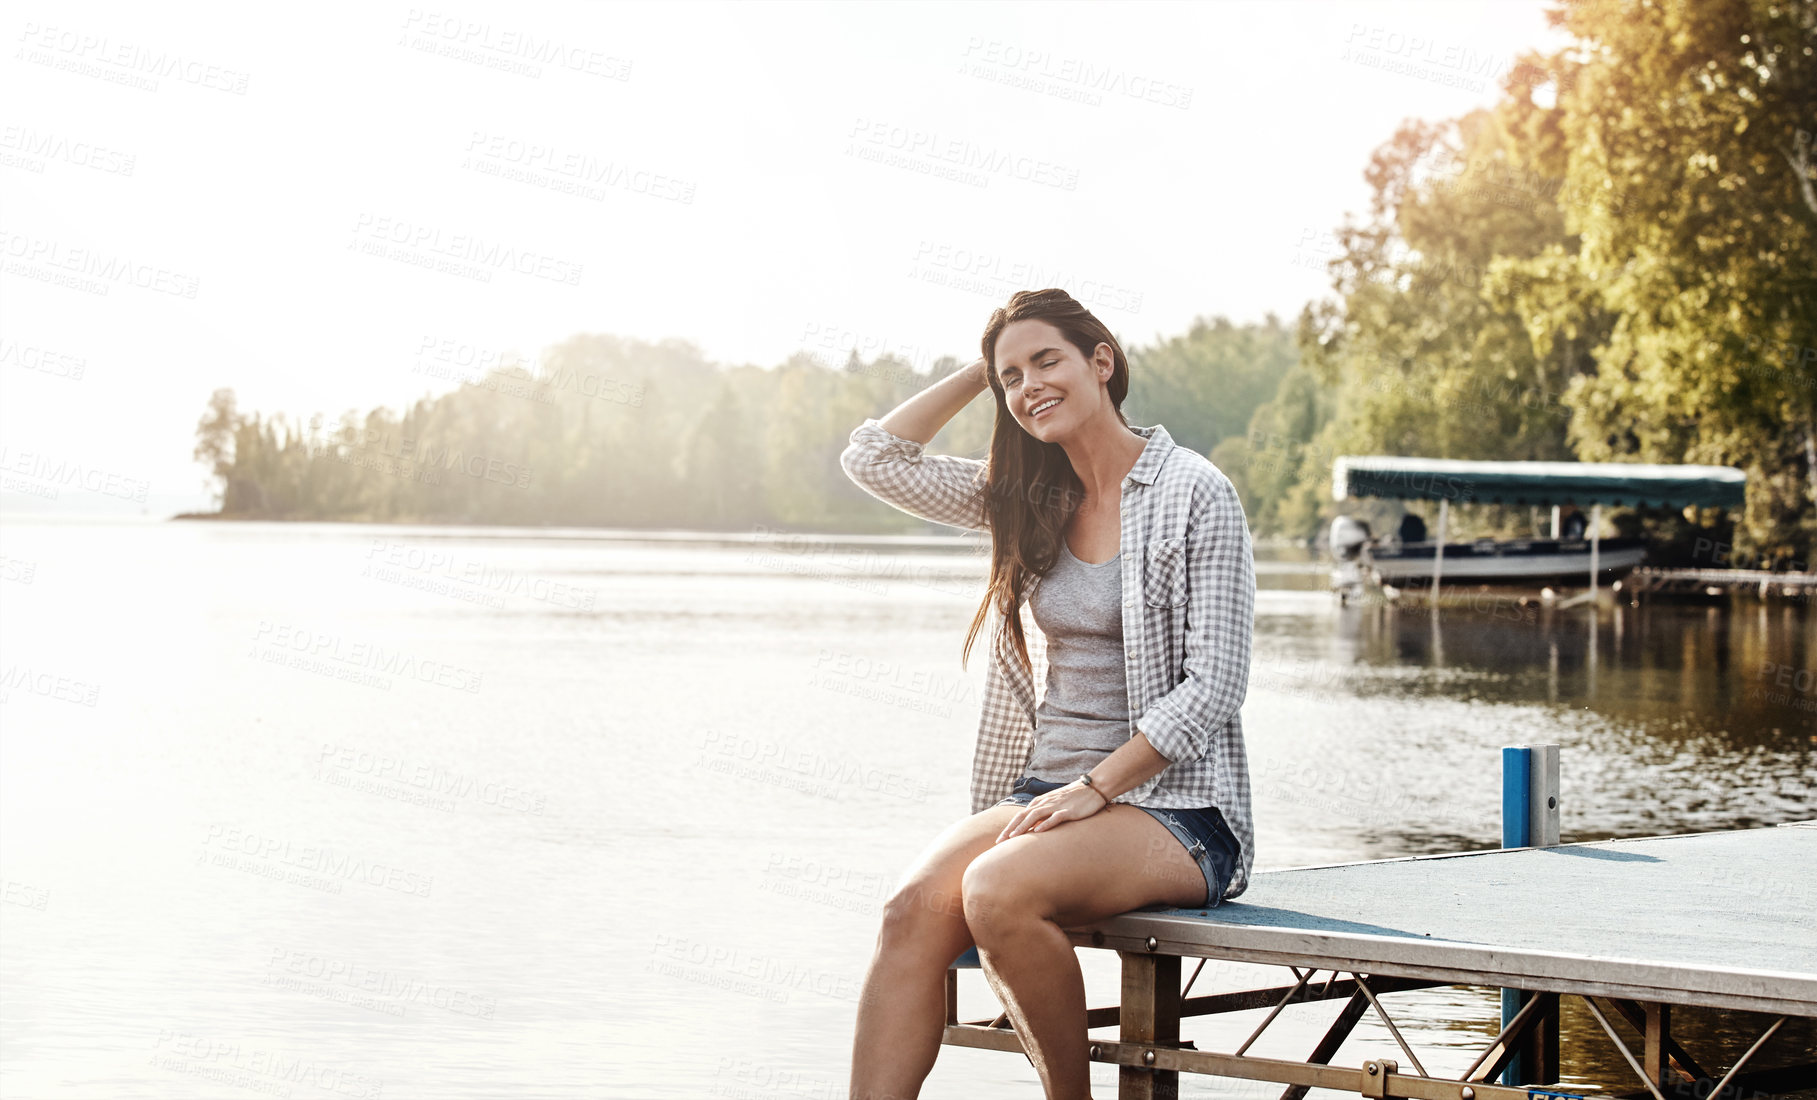 Buy stock photo Shot of an attractive young woman sitting on a pier